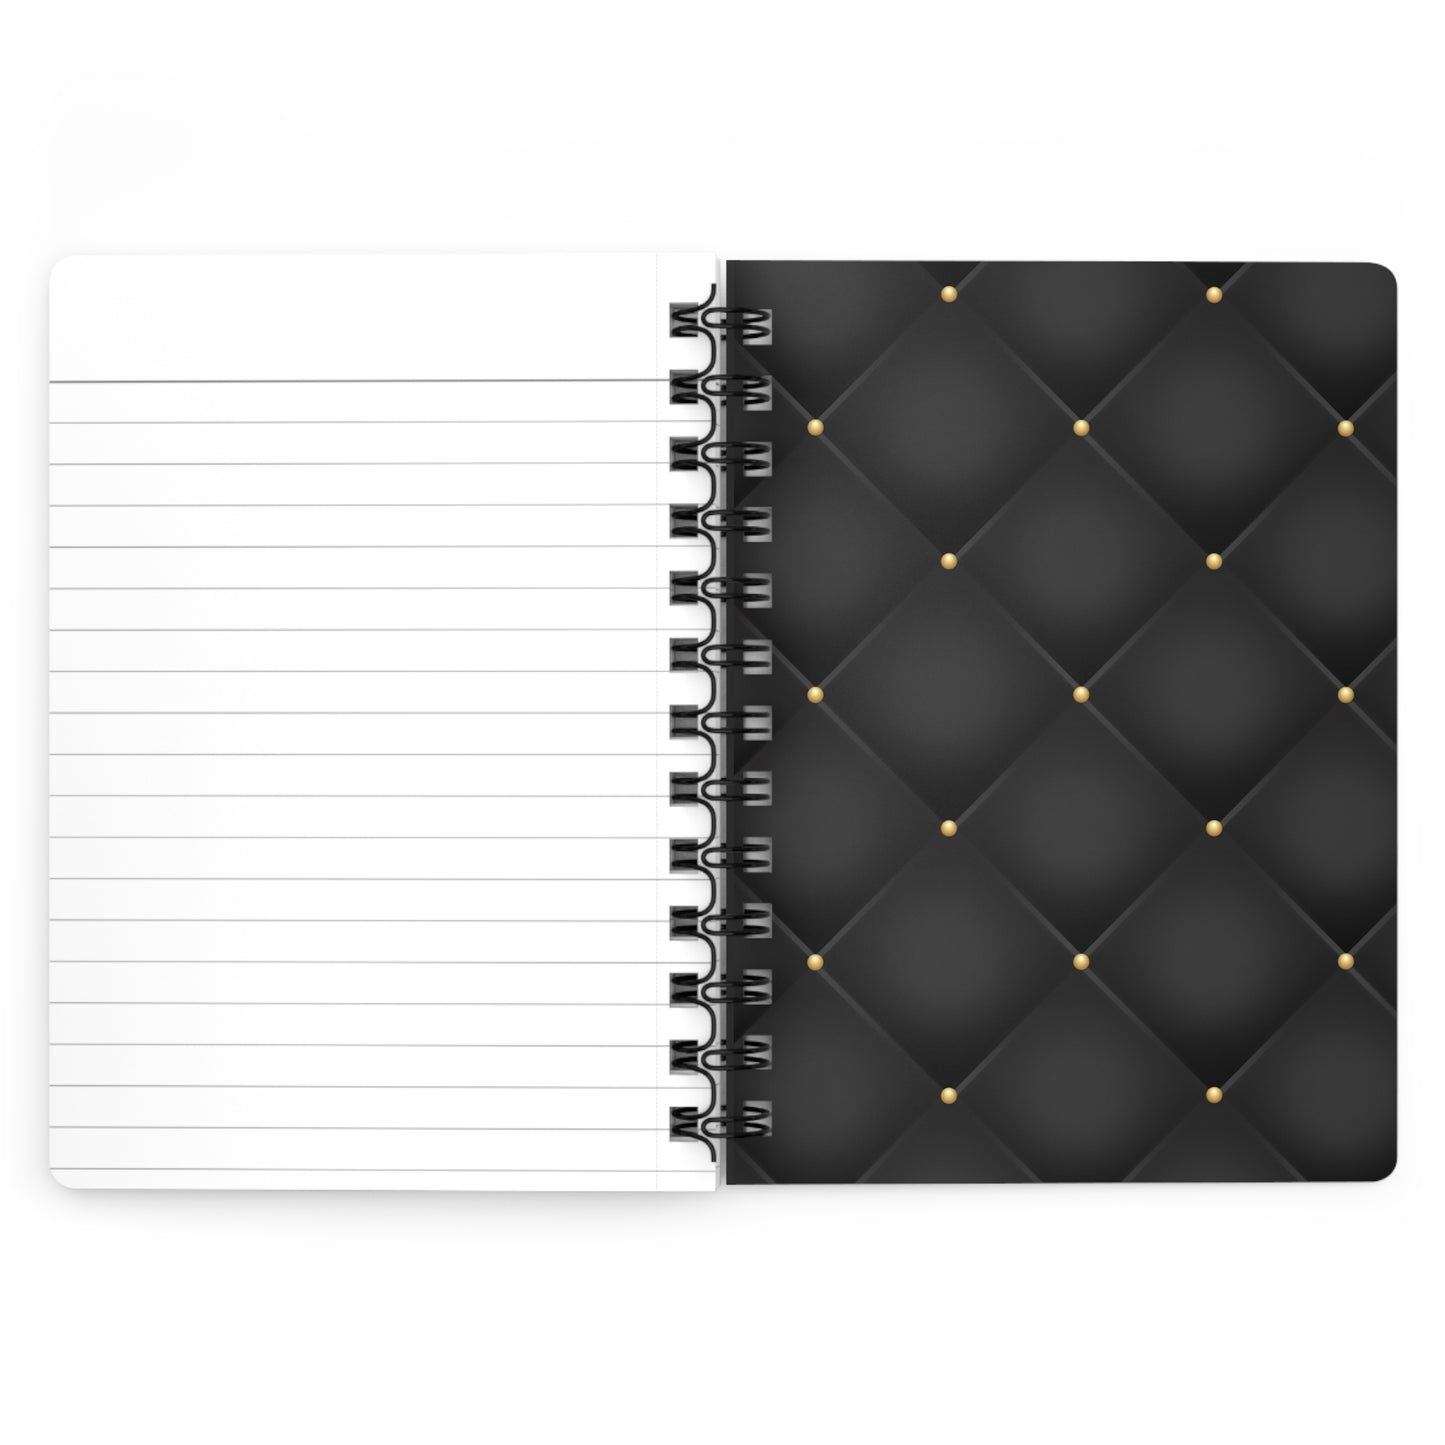 Stop for one minute Tufted Print Black and Gold Spiral Bound Journal